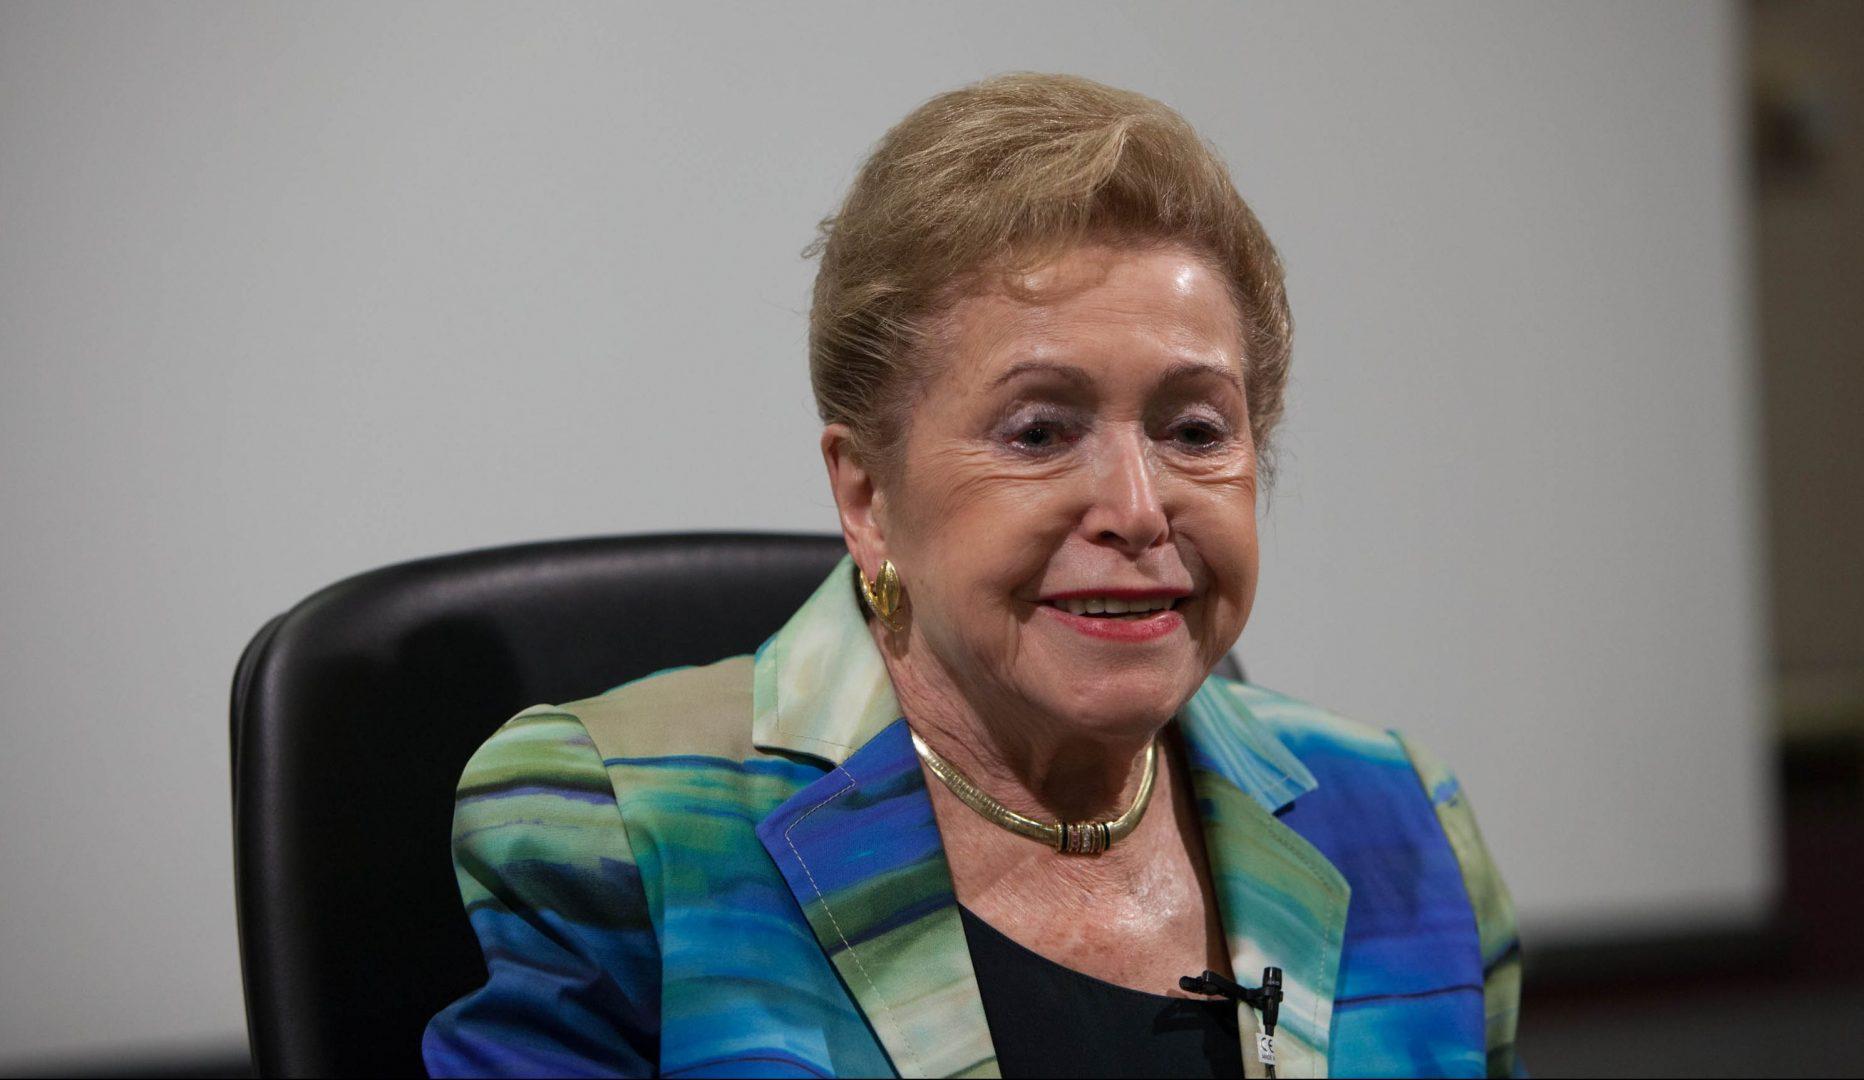 Mary Higgins Clark is a best-selling author and Fordham alumni. (PHOTO COURTESY OF ALVIN TRUSTY VIA FLICKR)